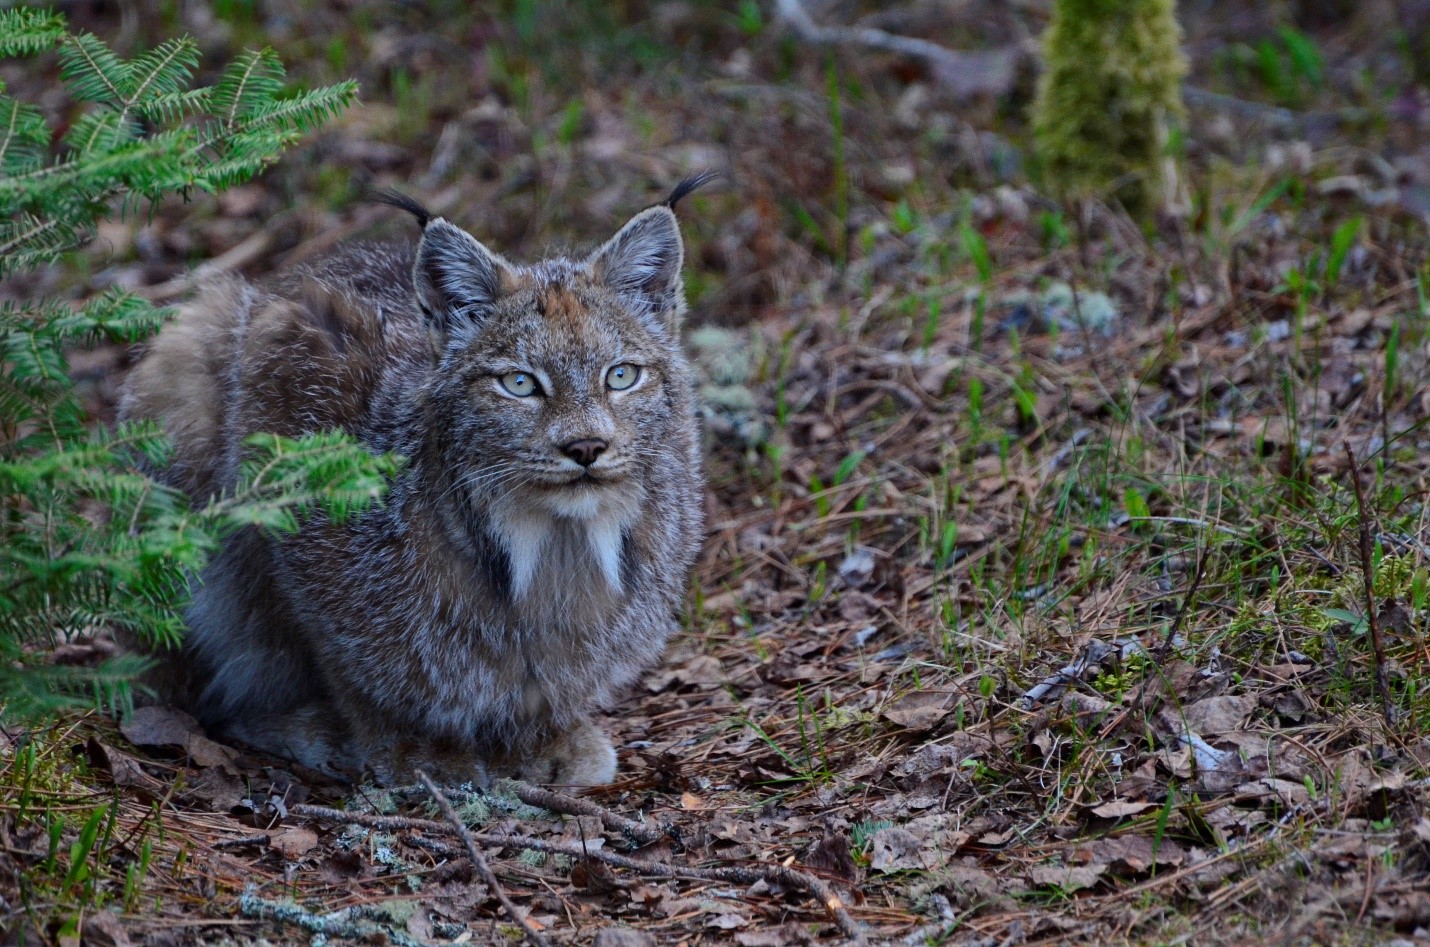 A Canada Lynx crouched down on the forest floor